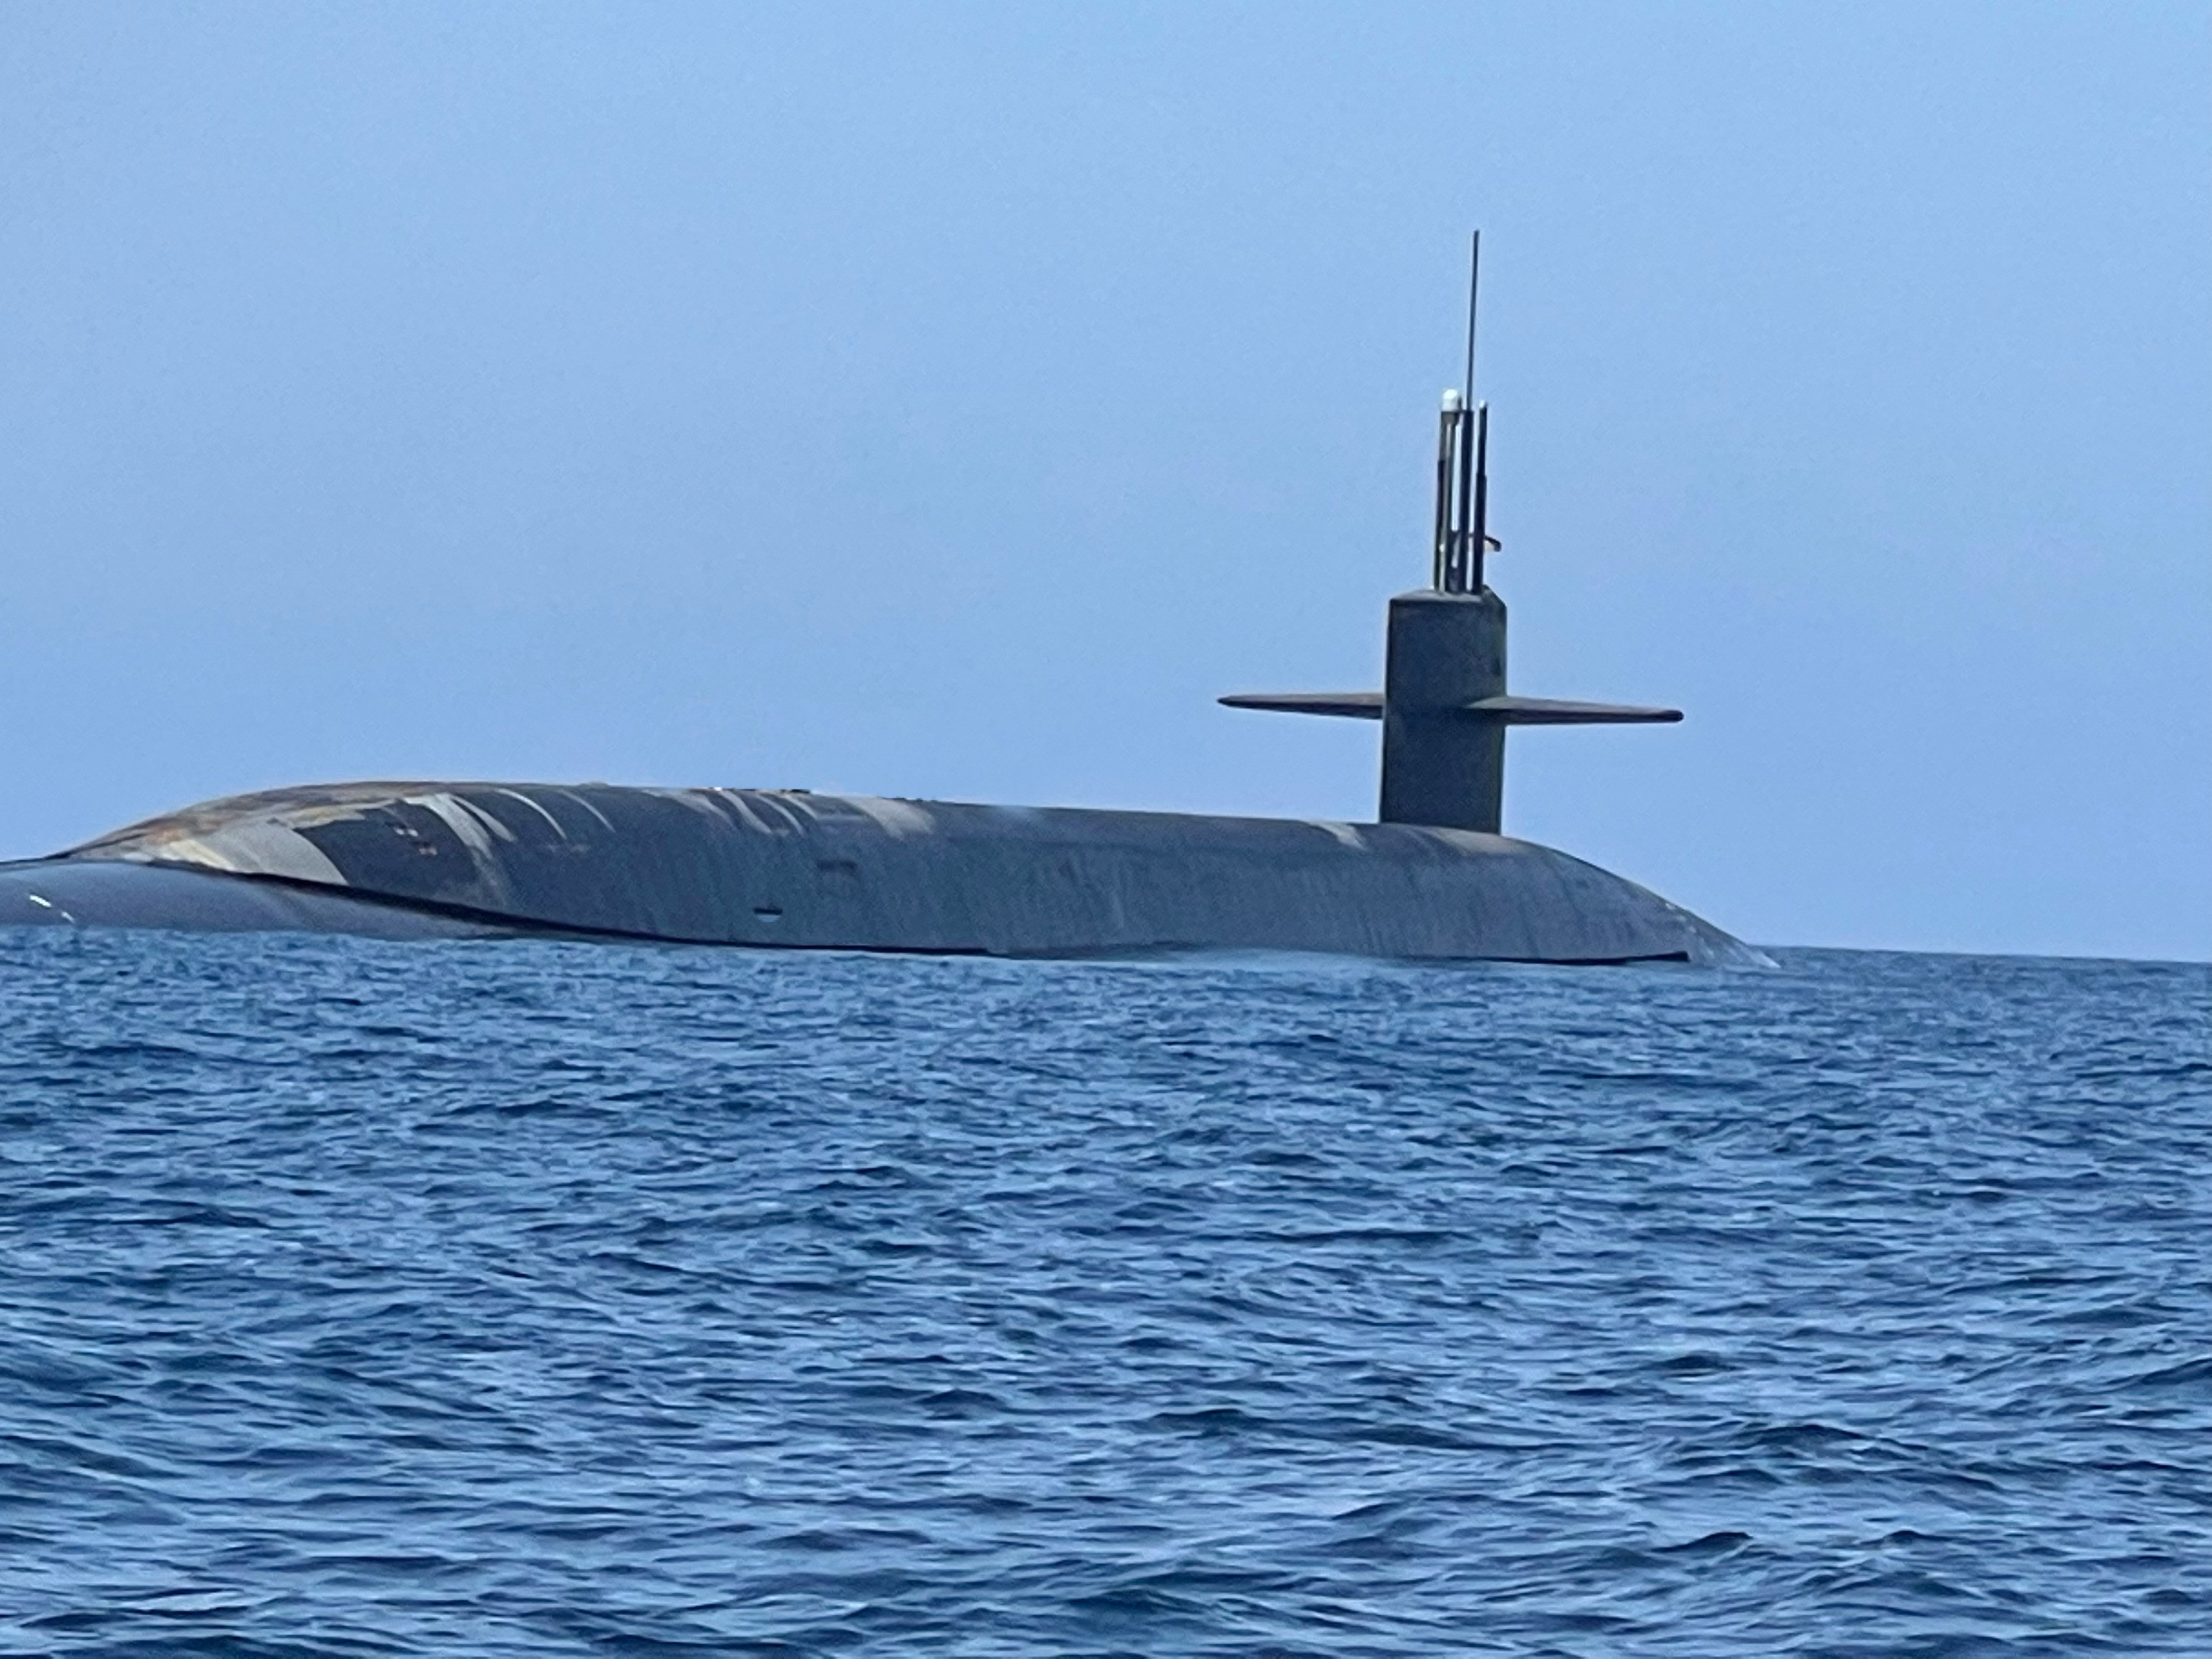 Pentagon: Just FYI, We Have a Nuclear-Armed Submarine in the Arabian Sea